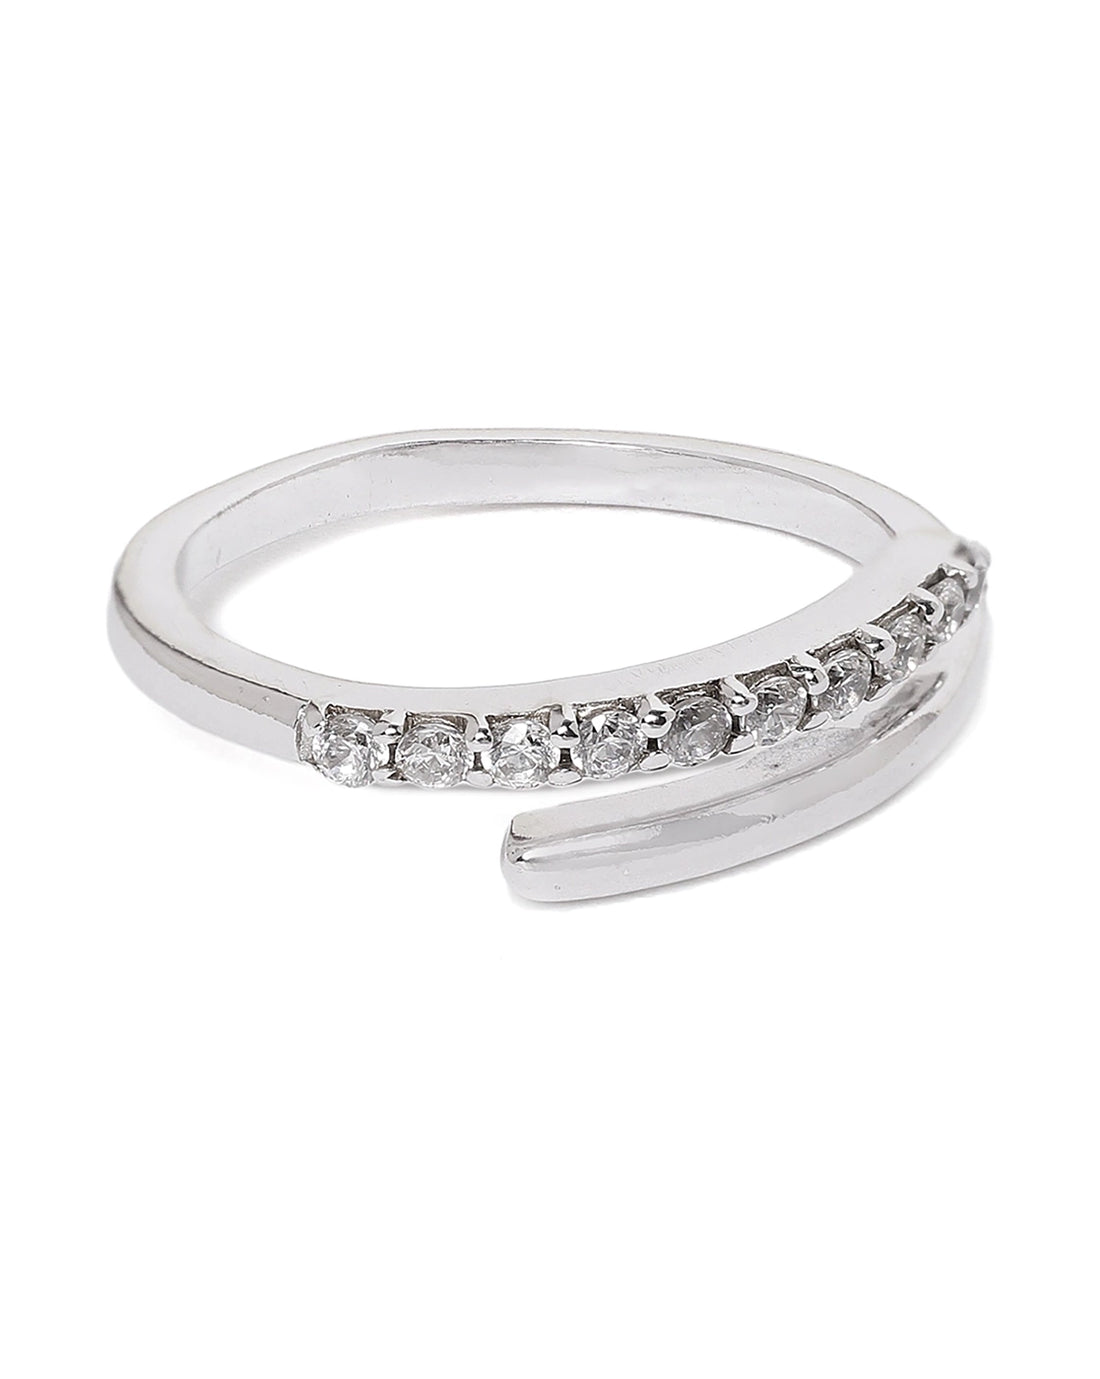 Carlton London Rhodium Plated Silver Toned Cz Studded Adjustable Finger Ring For Women